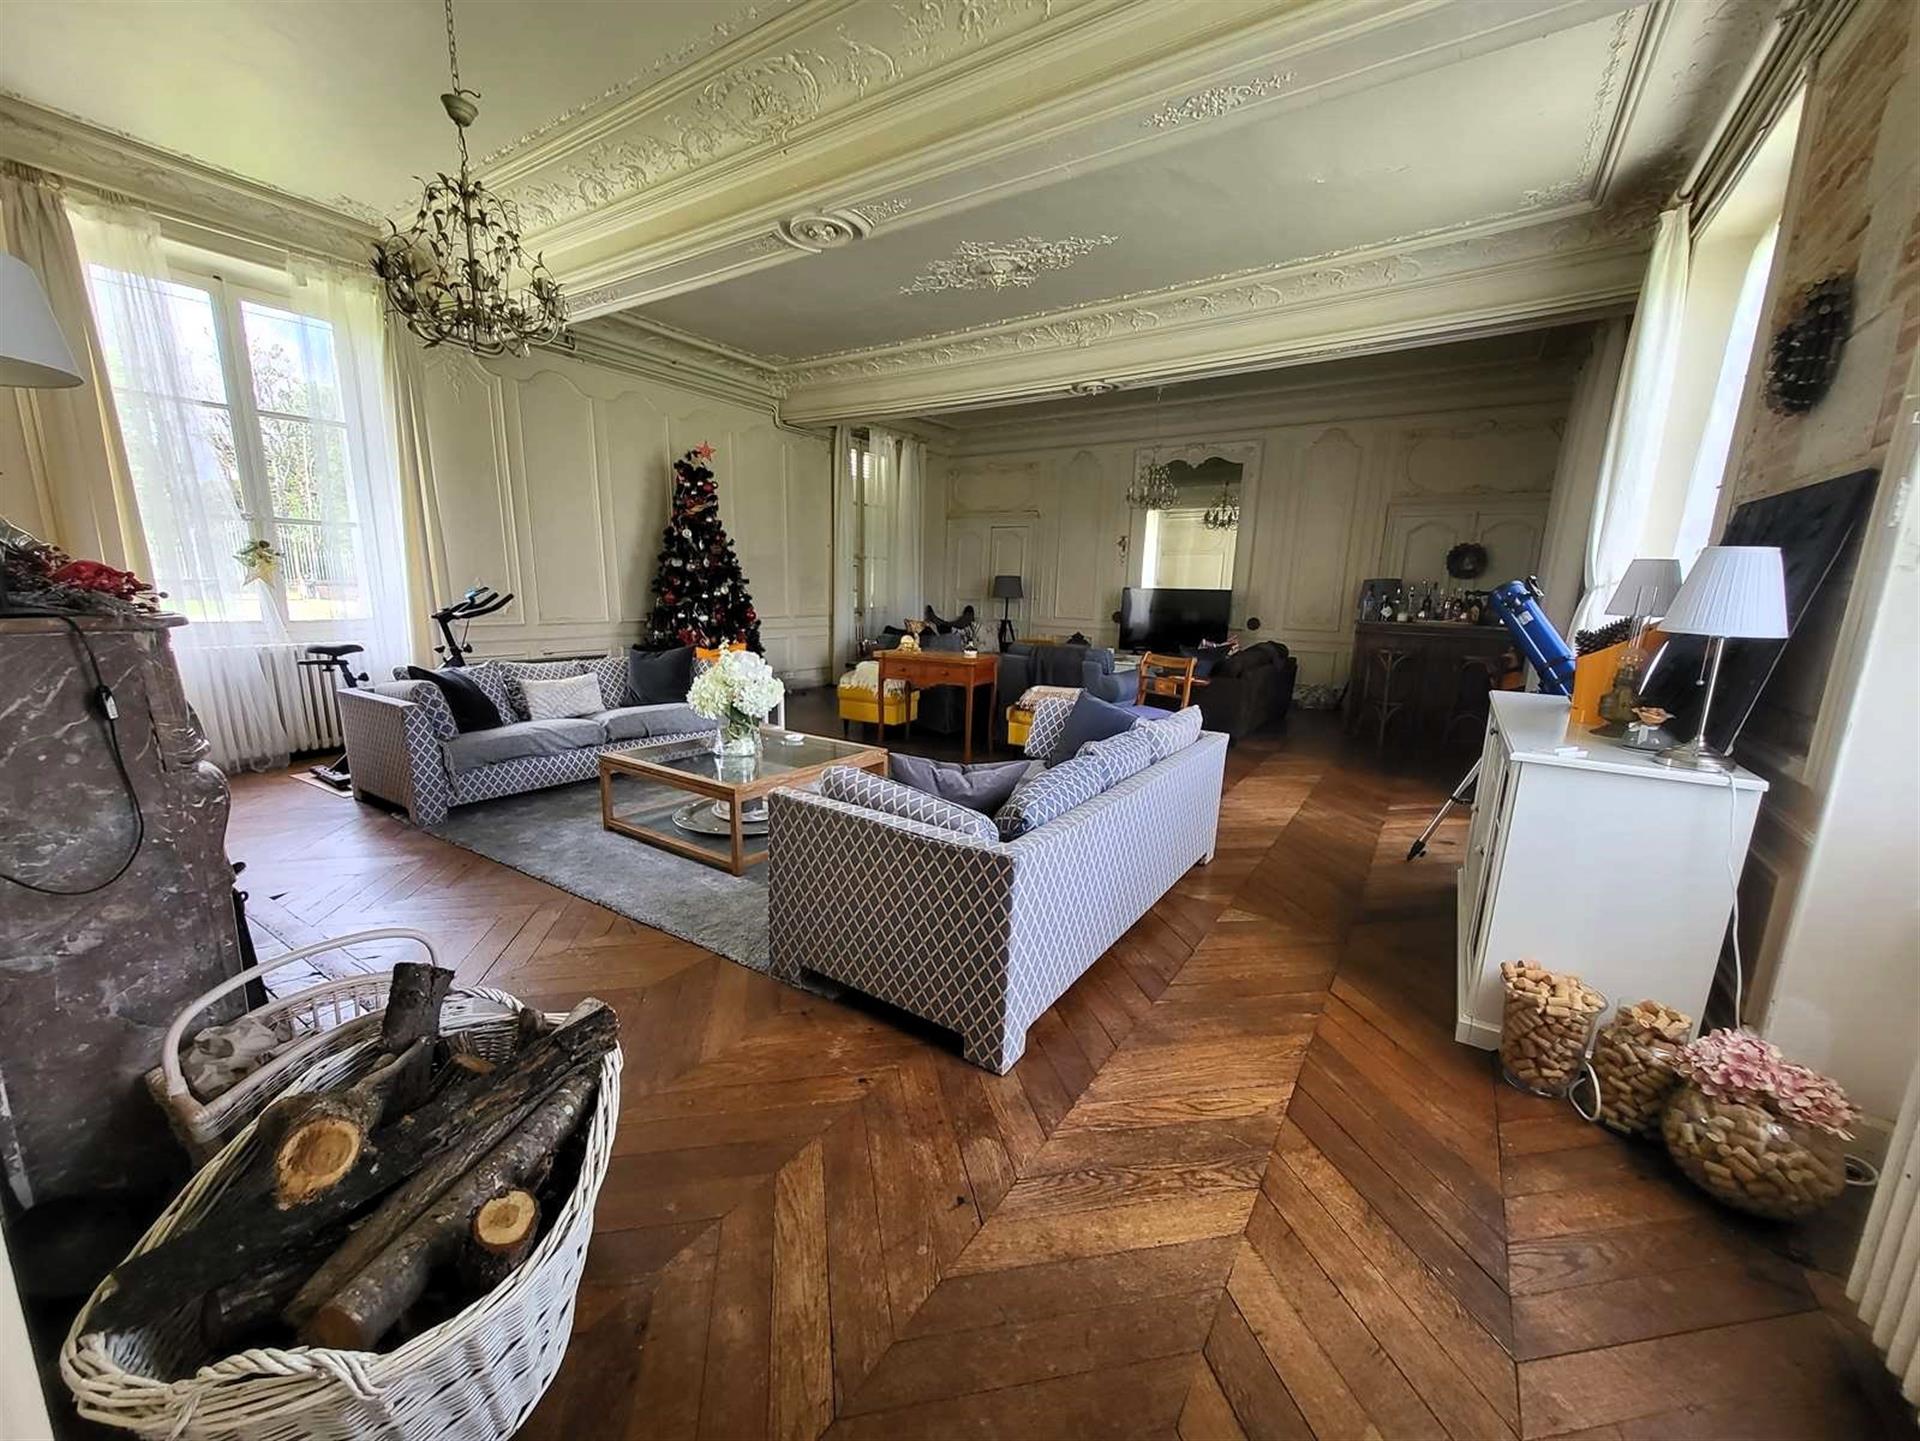 Aparment for sale in Sologne in a 17th century castle in a wooded park 23.5 hectares